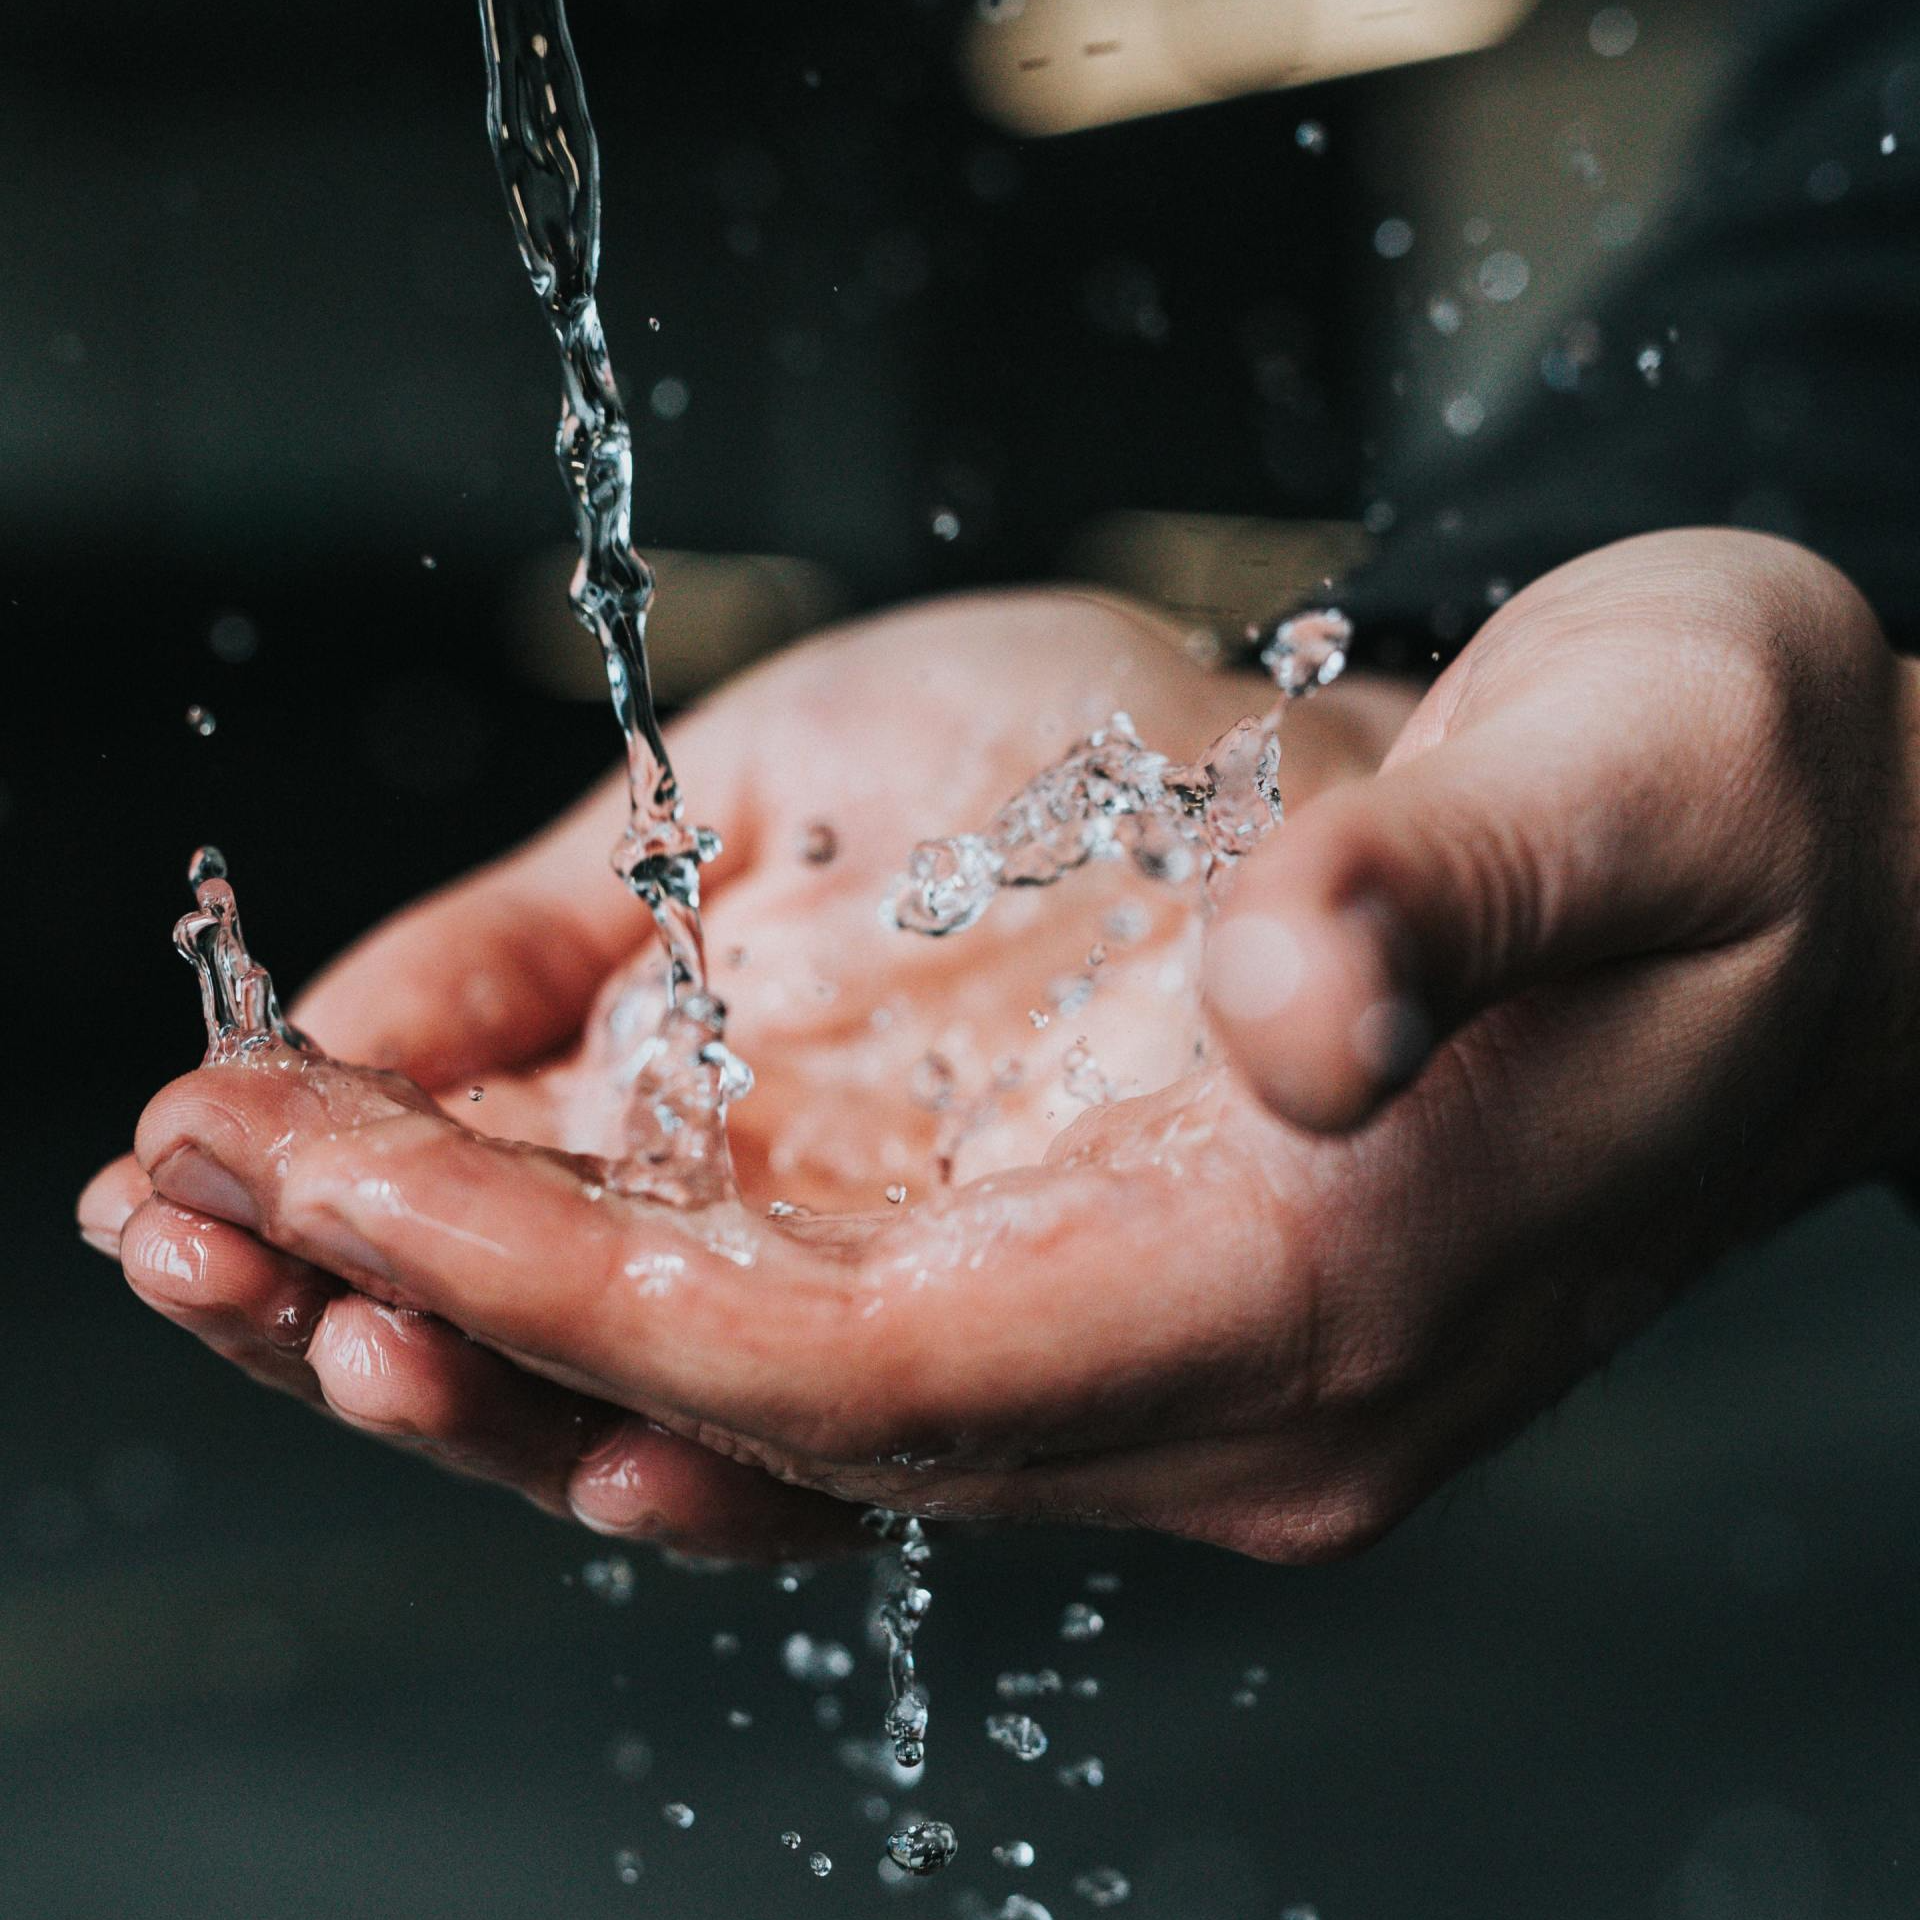 A close up of a person holding water in their hands